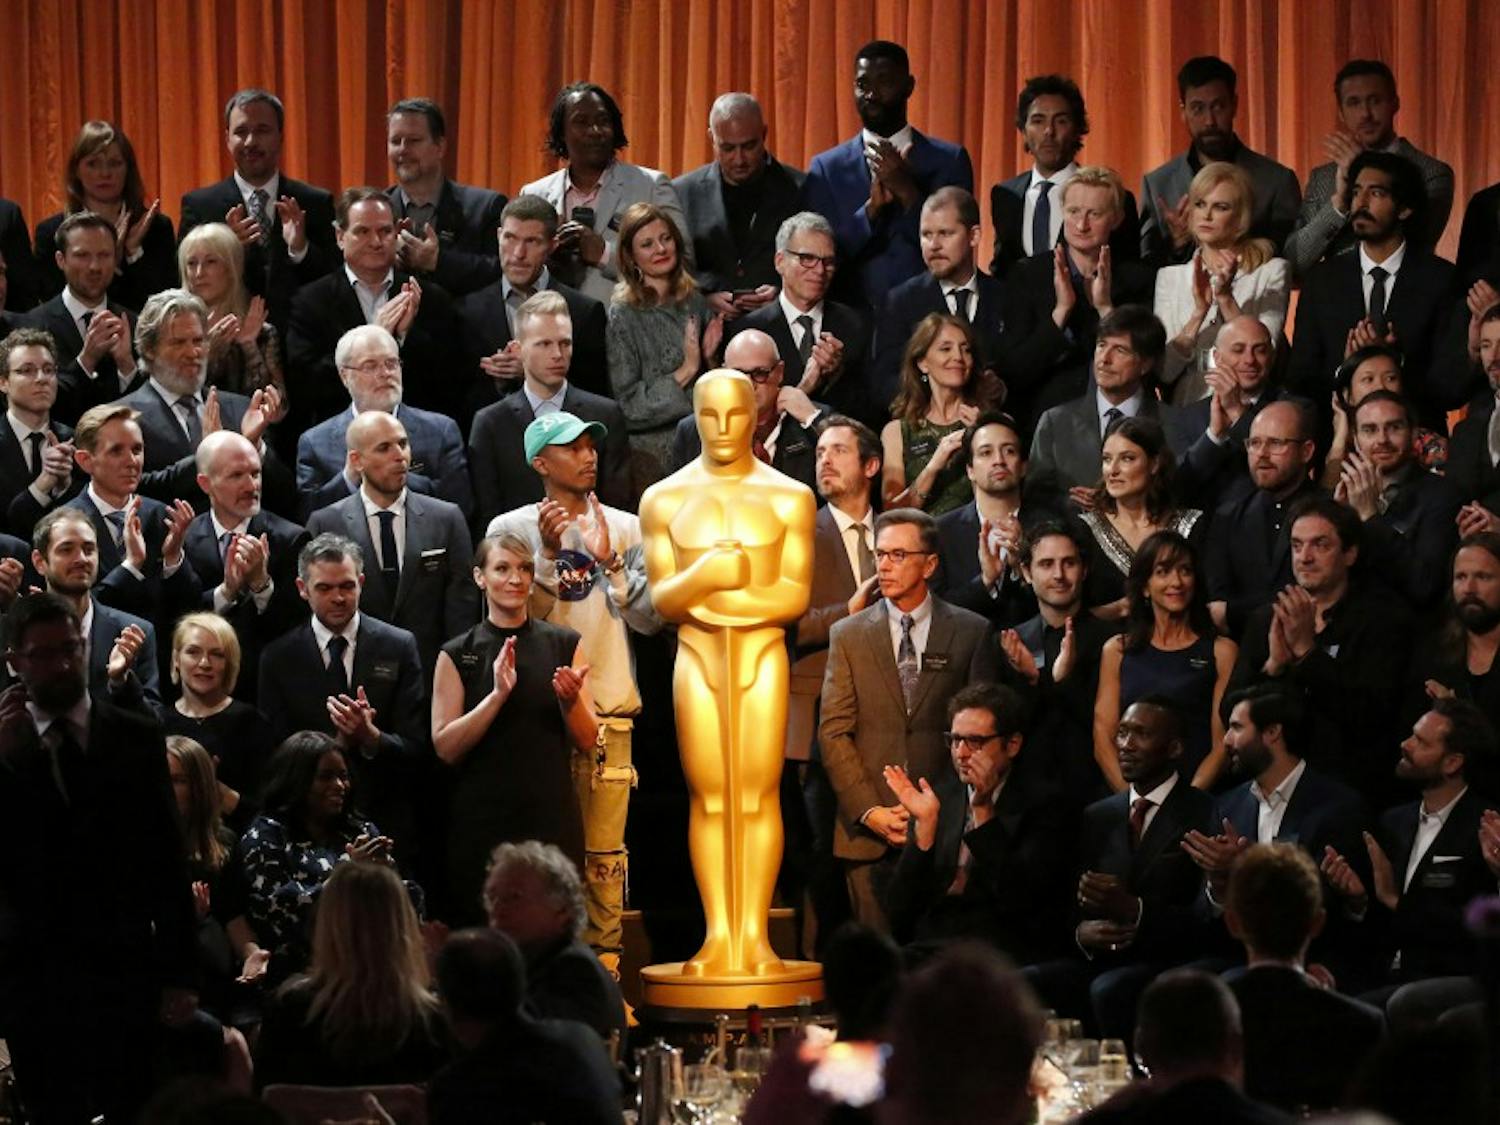 Attendees on Monday, Feb. 6, 2017 prepare for the class picture of all the nominees during the Academy Awards annual nominees luncheon for the 89th Oscars at the Beverly Hilton Hotel in Beverly Hills, Calif. (Al Seib/Los Angeles Times/TNS)